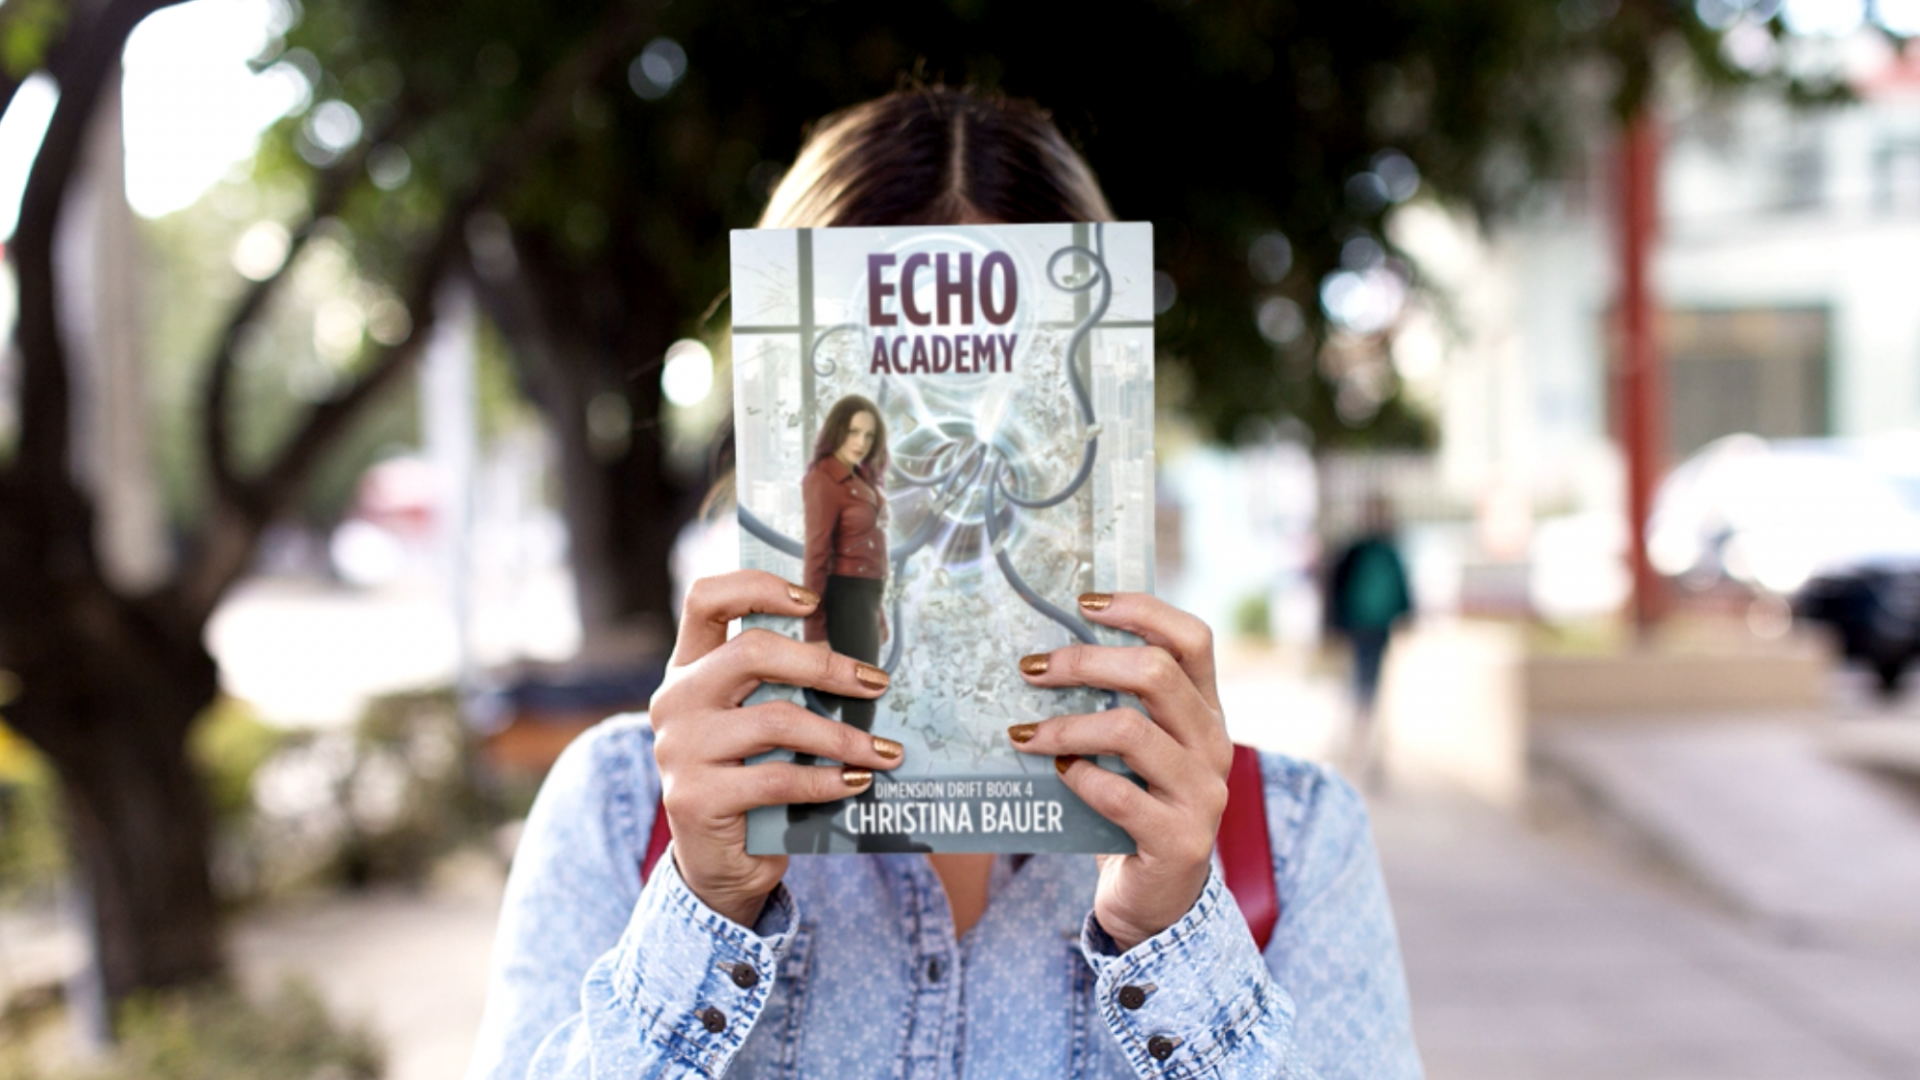 ECHO ACADEMY - New And Extended Description